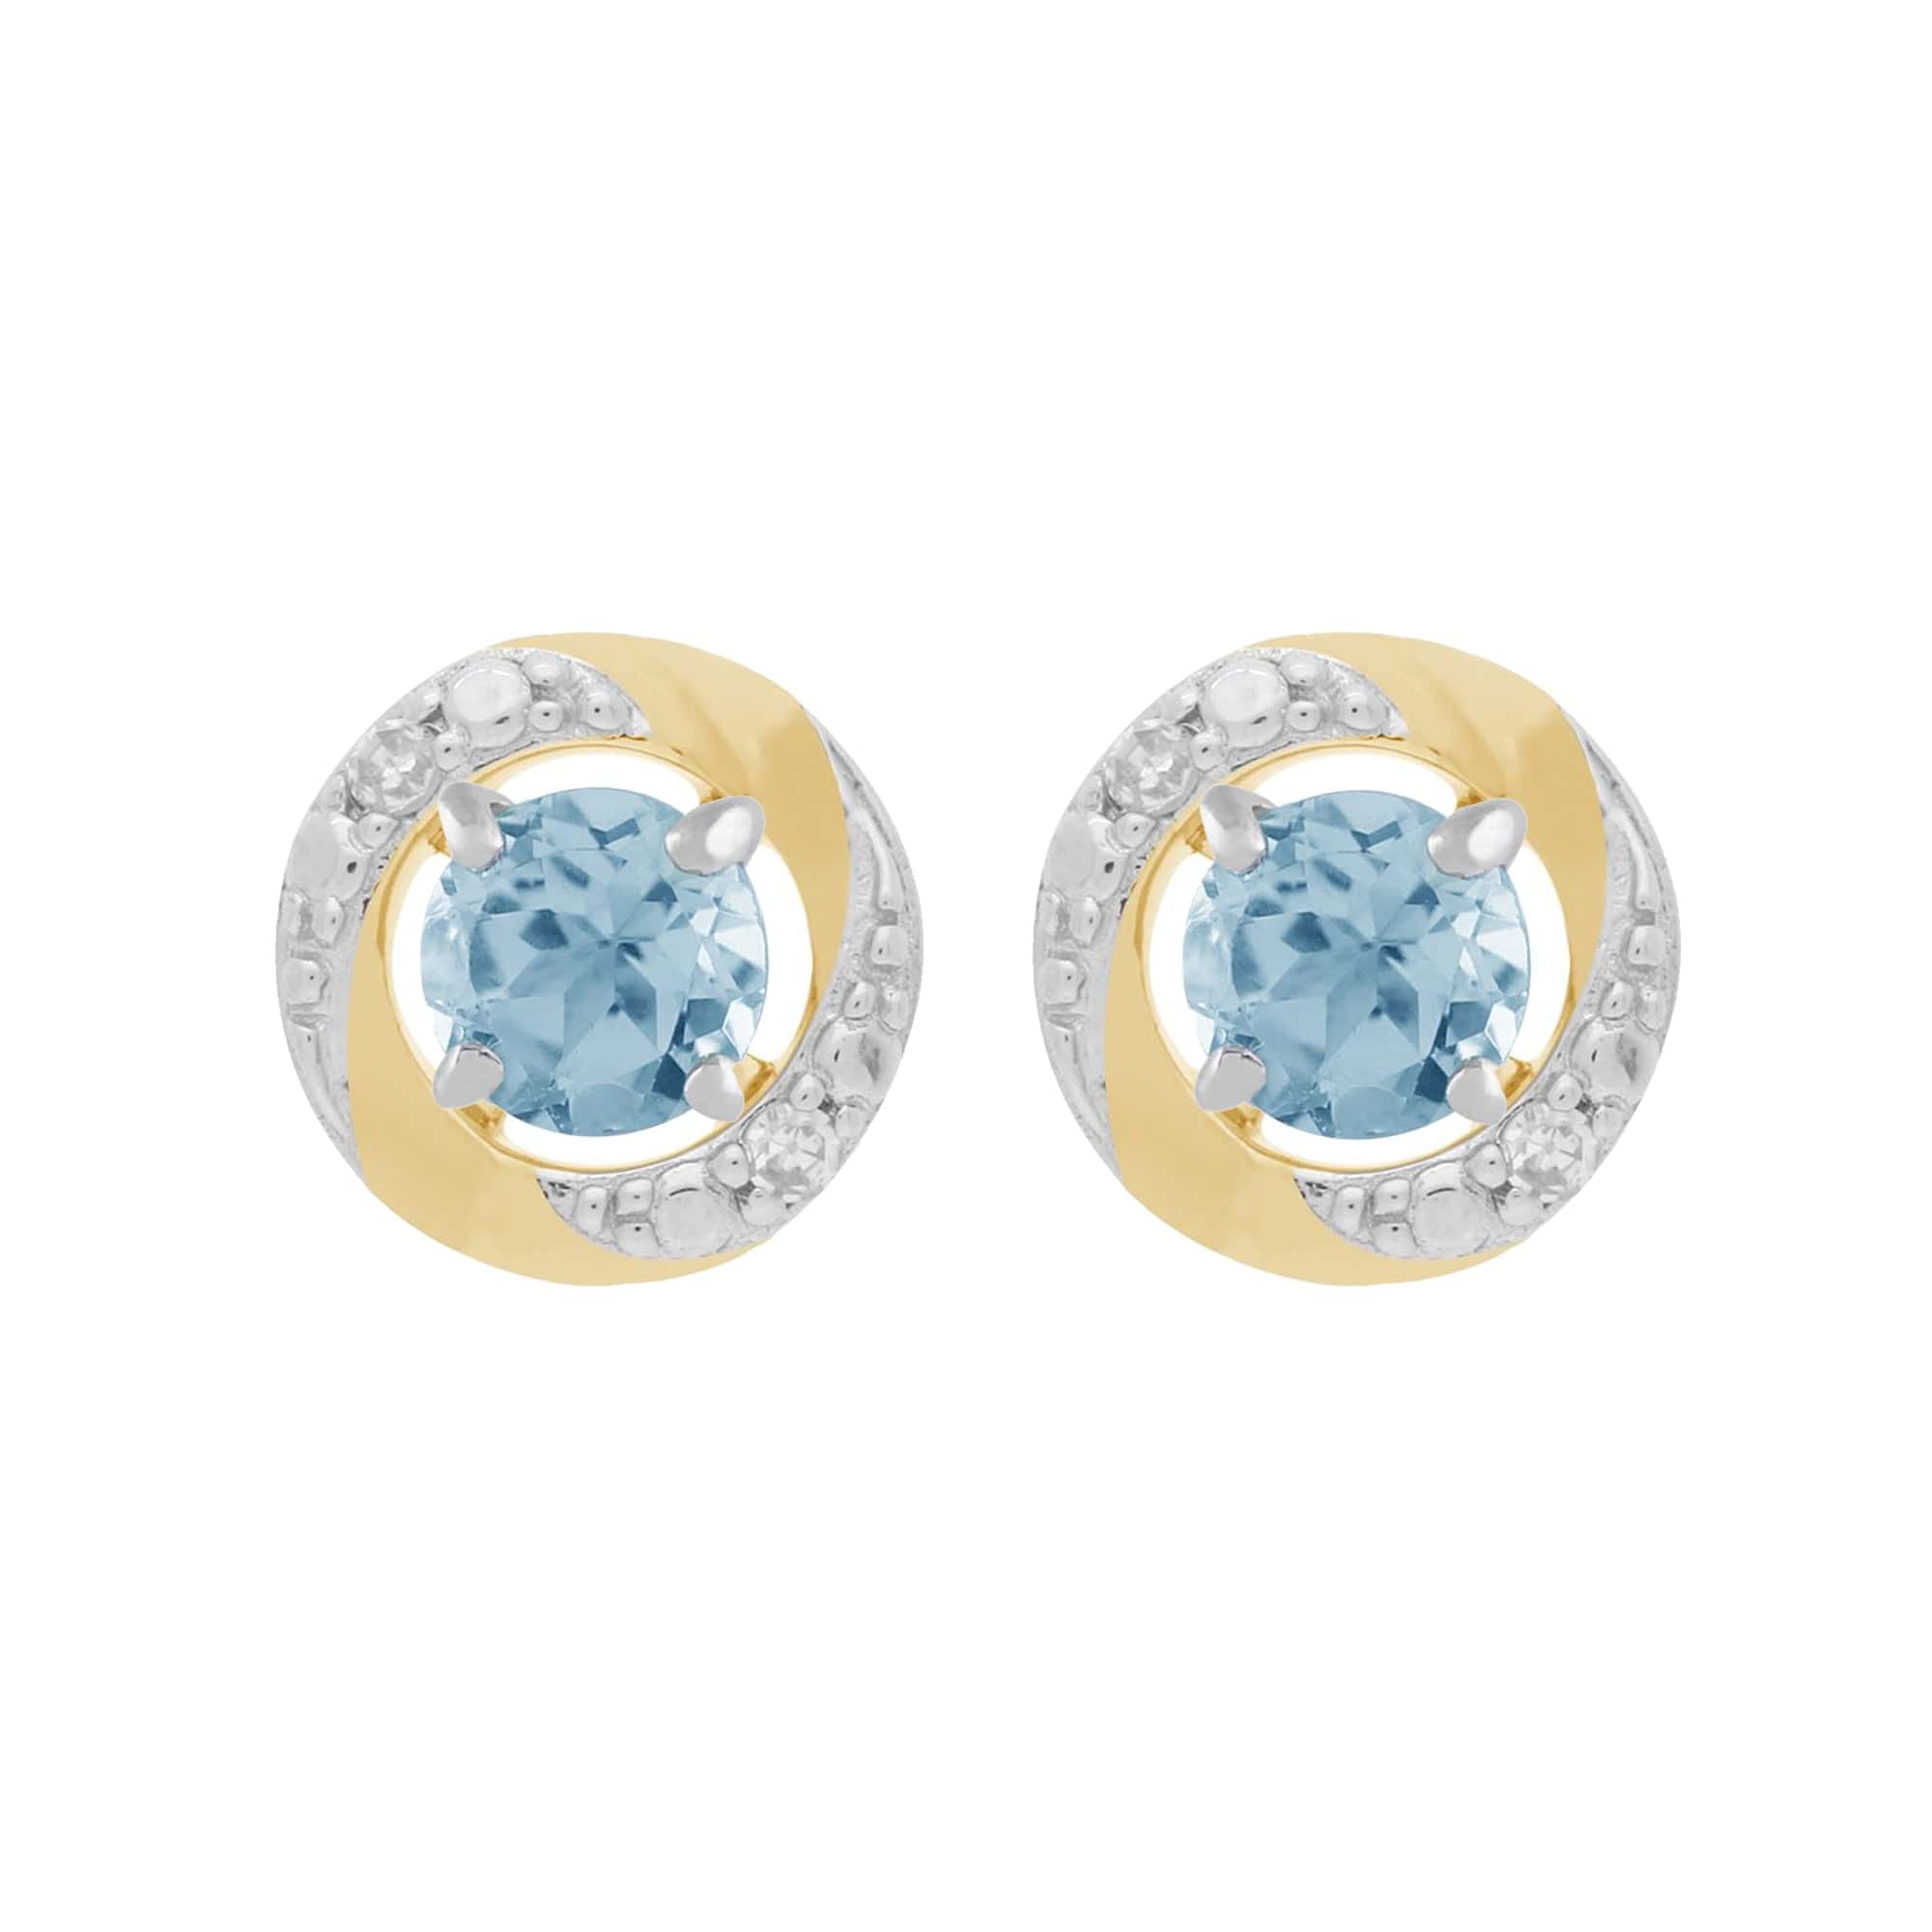 11623-191E0374019 9ct White Gold Blue Topaz Stud Earrings with Detachable Diamond Halo Ear Jacket in 9ct Yellow Gold 1